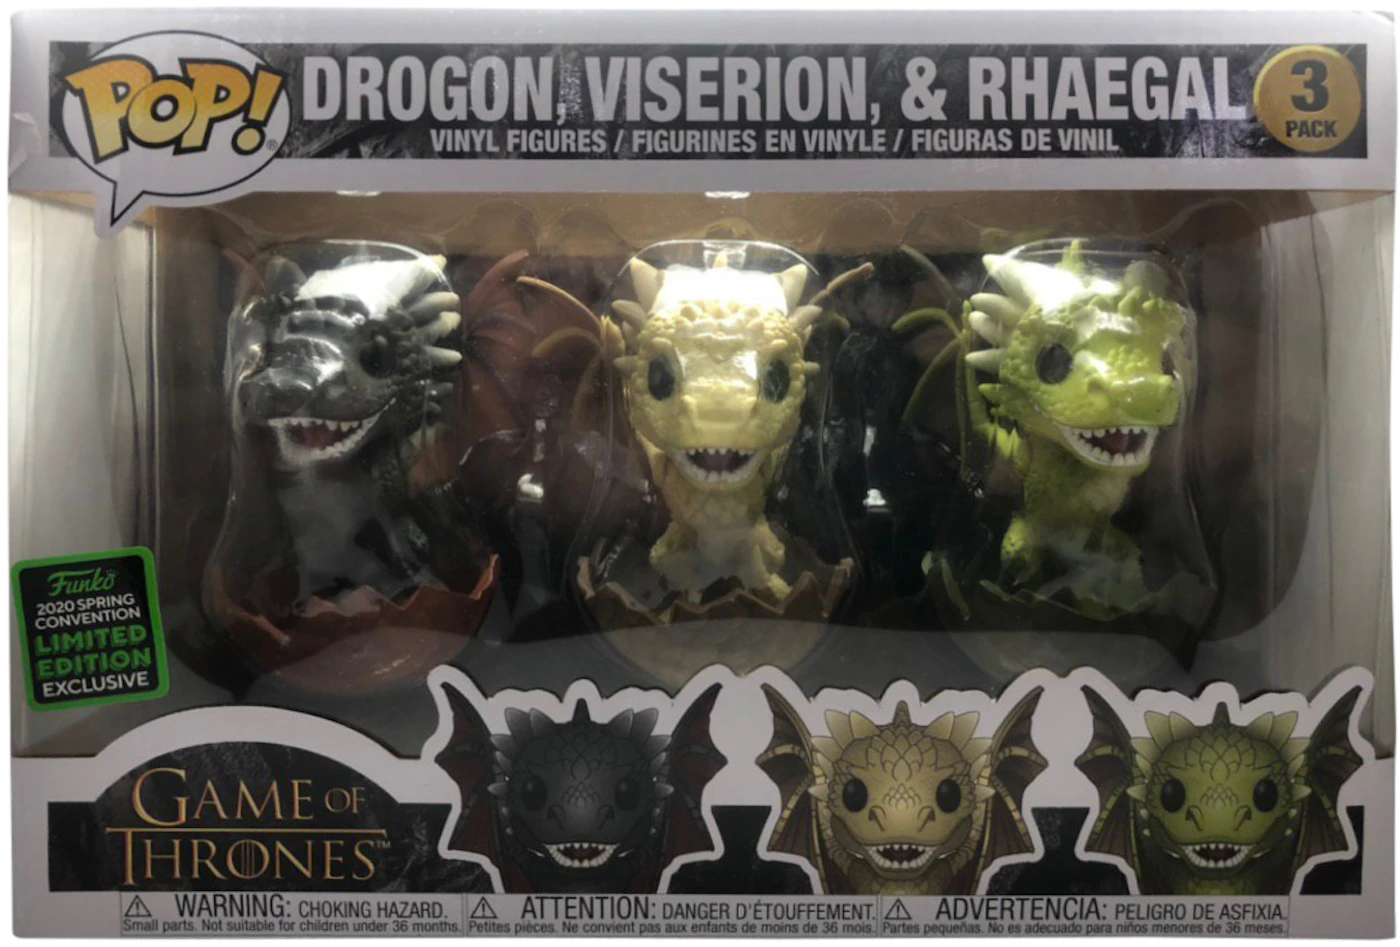 Funko Game of Thrones Viserion & Spring Convention 3 Pack - US